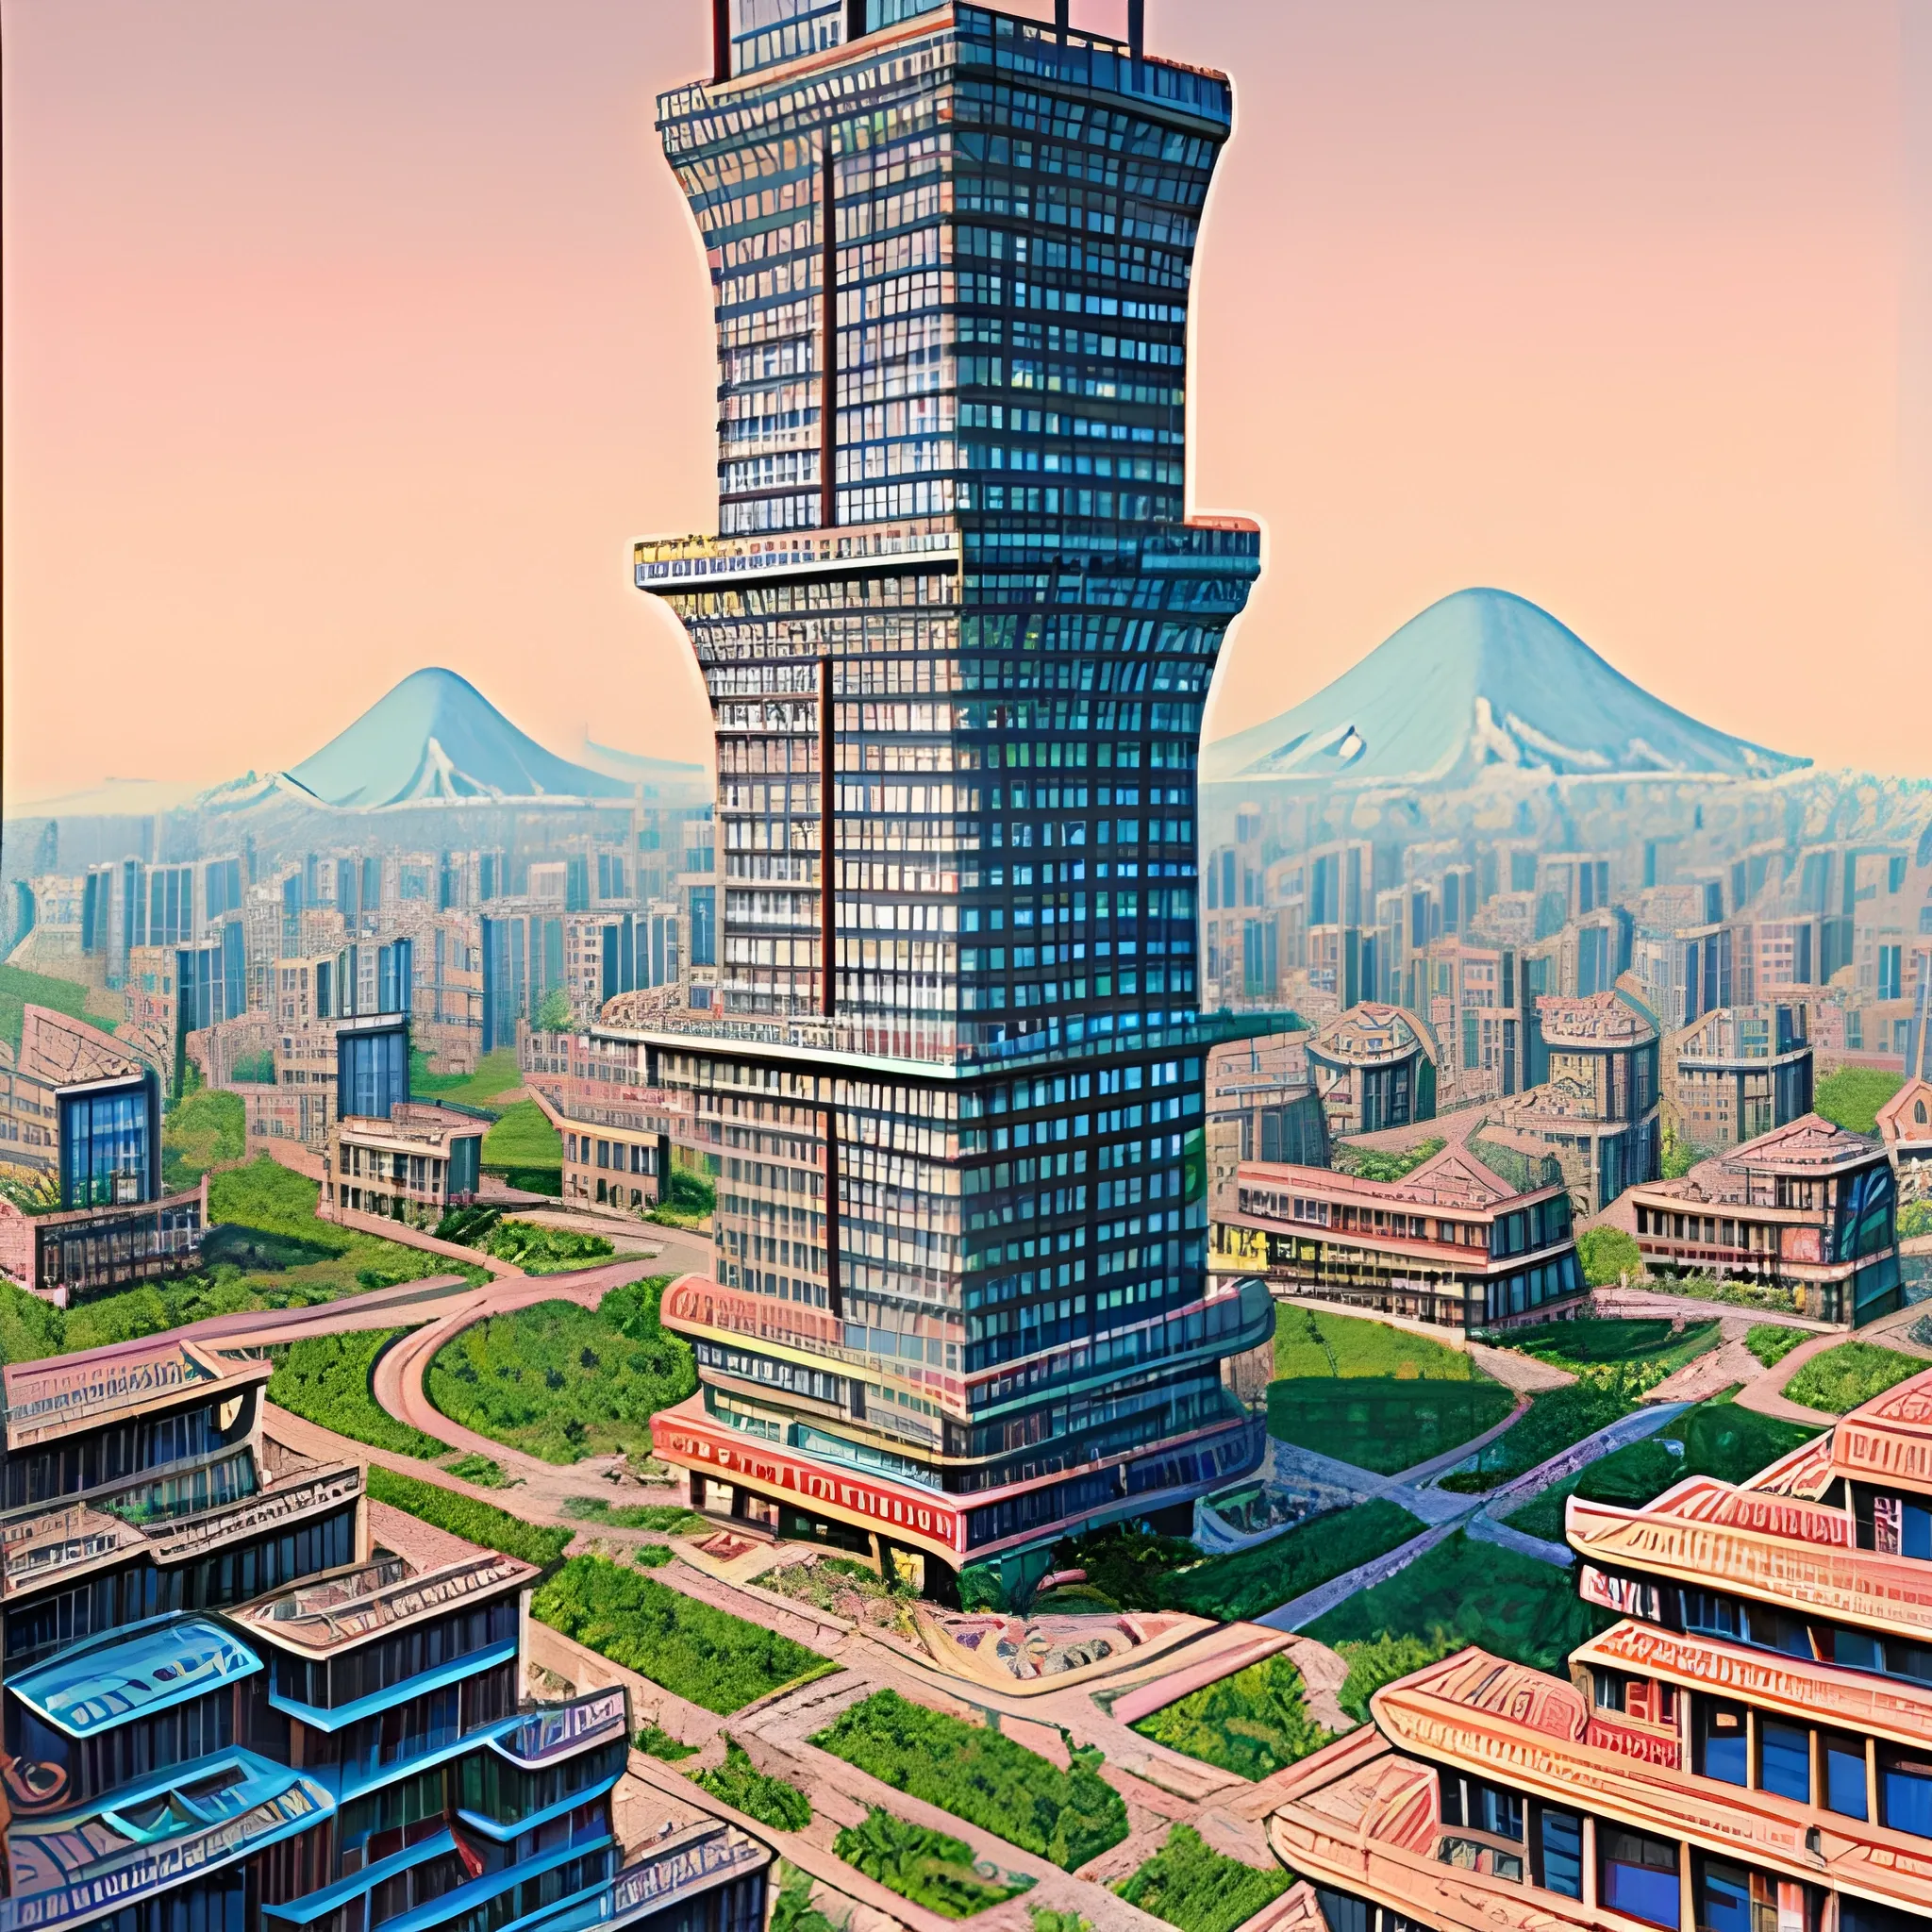 1960 Chinese city, with a mix of modern architecture, drawn in Jean Giraud's art style, full view
